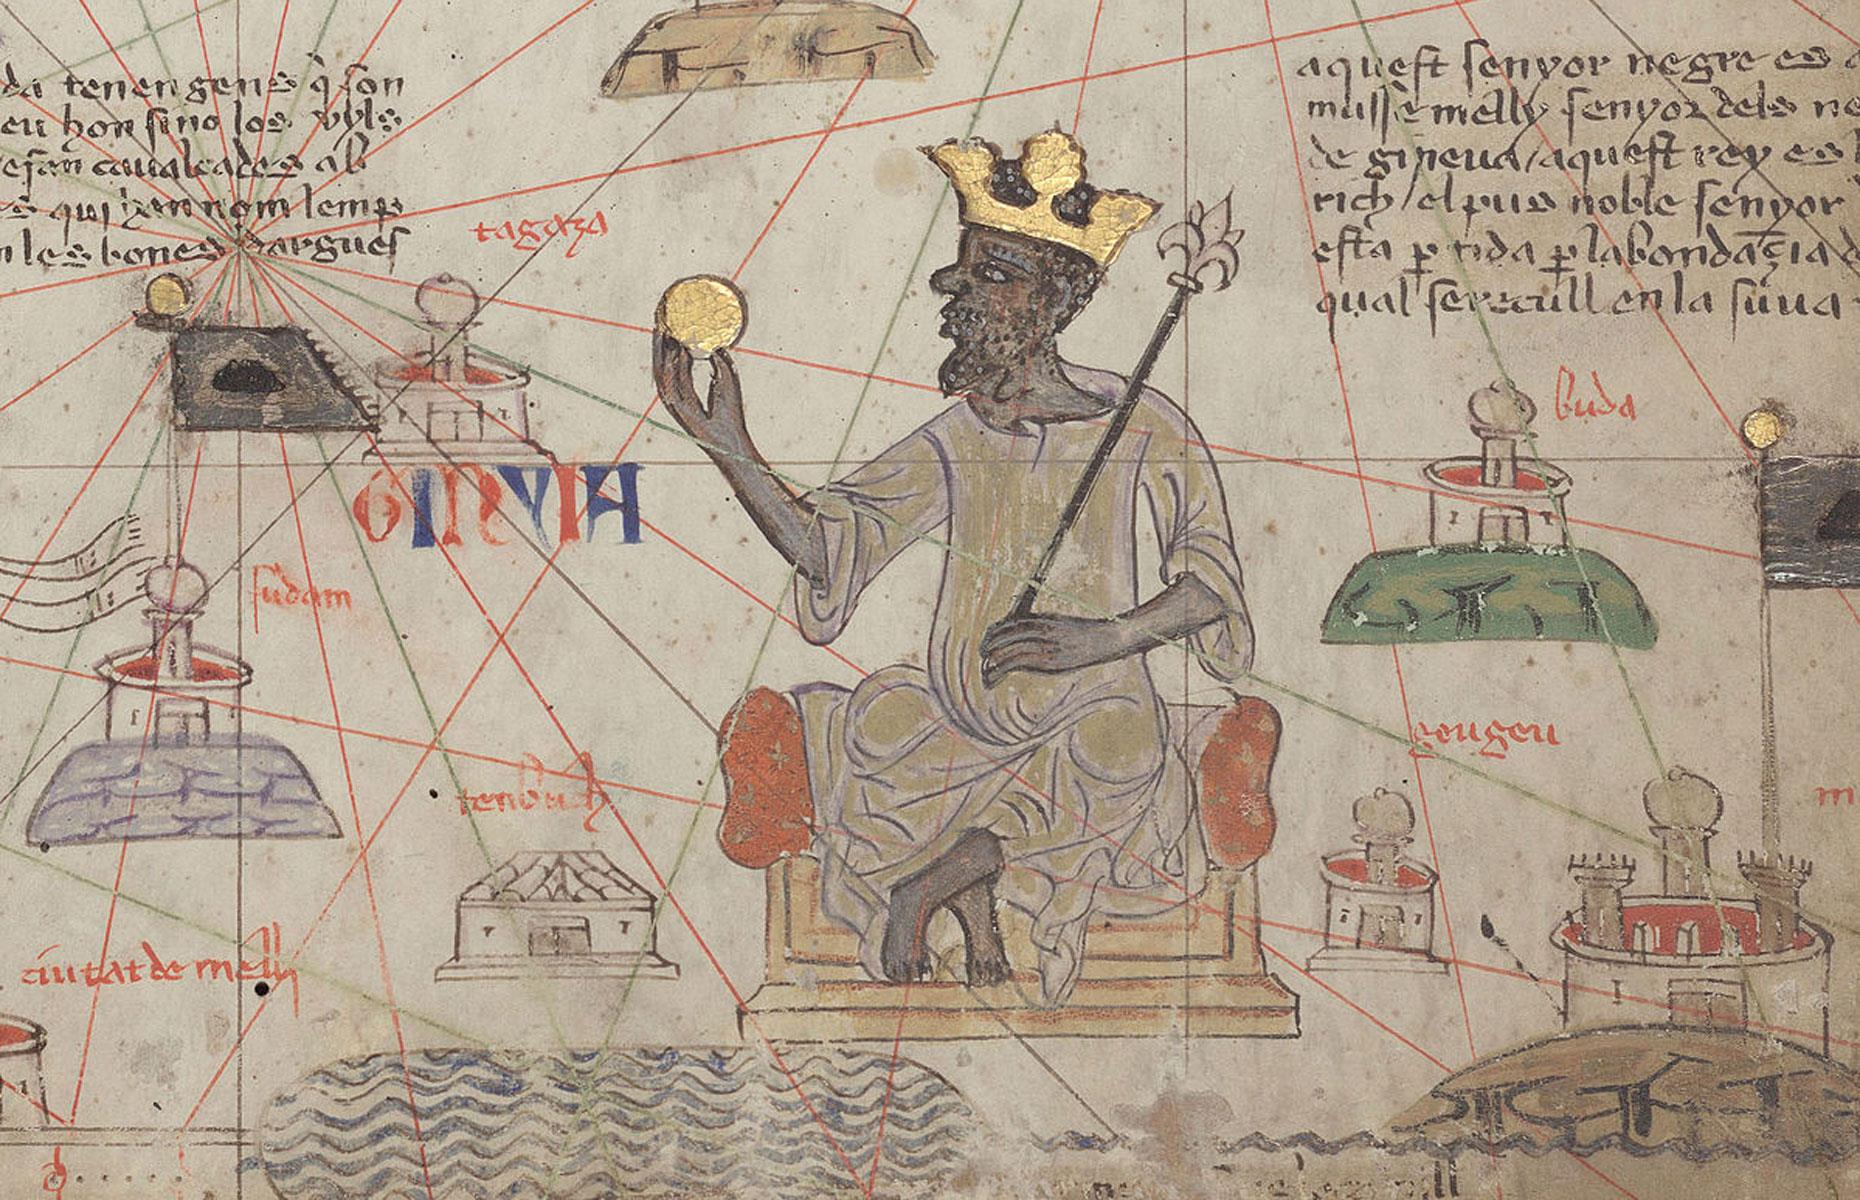 Mansa Musa I is one of the wealthiest to have ever lived